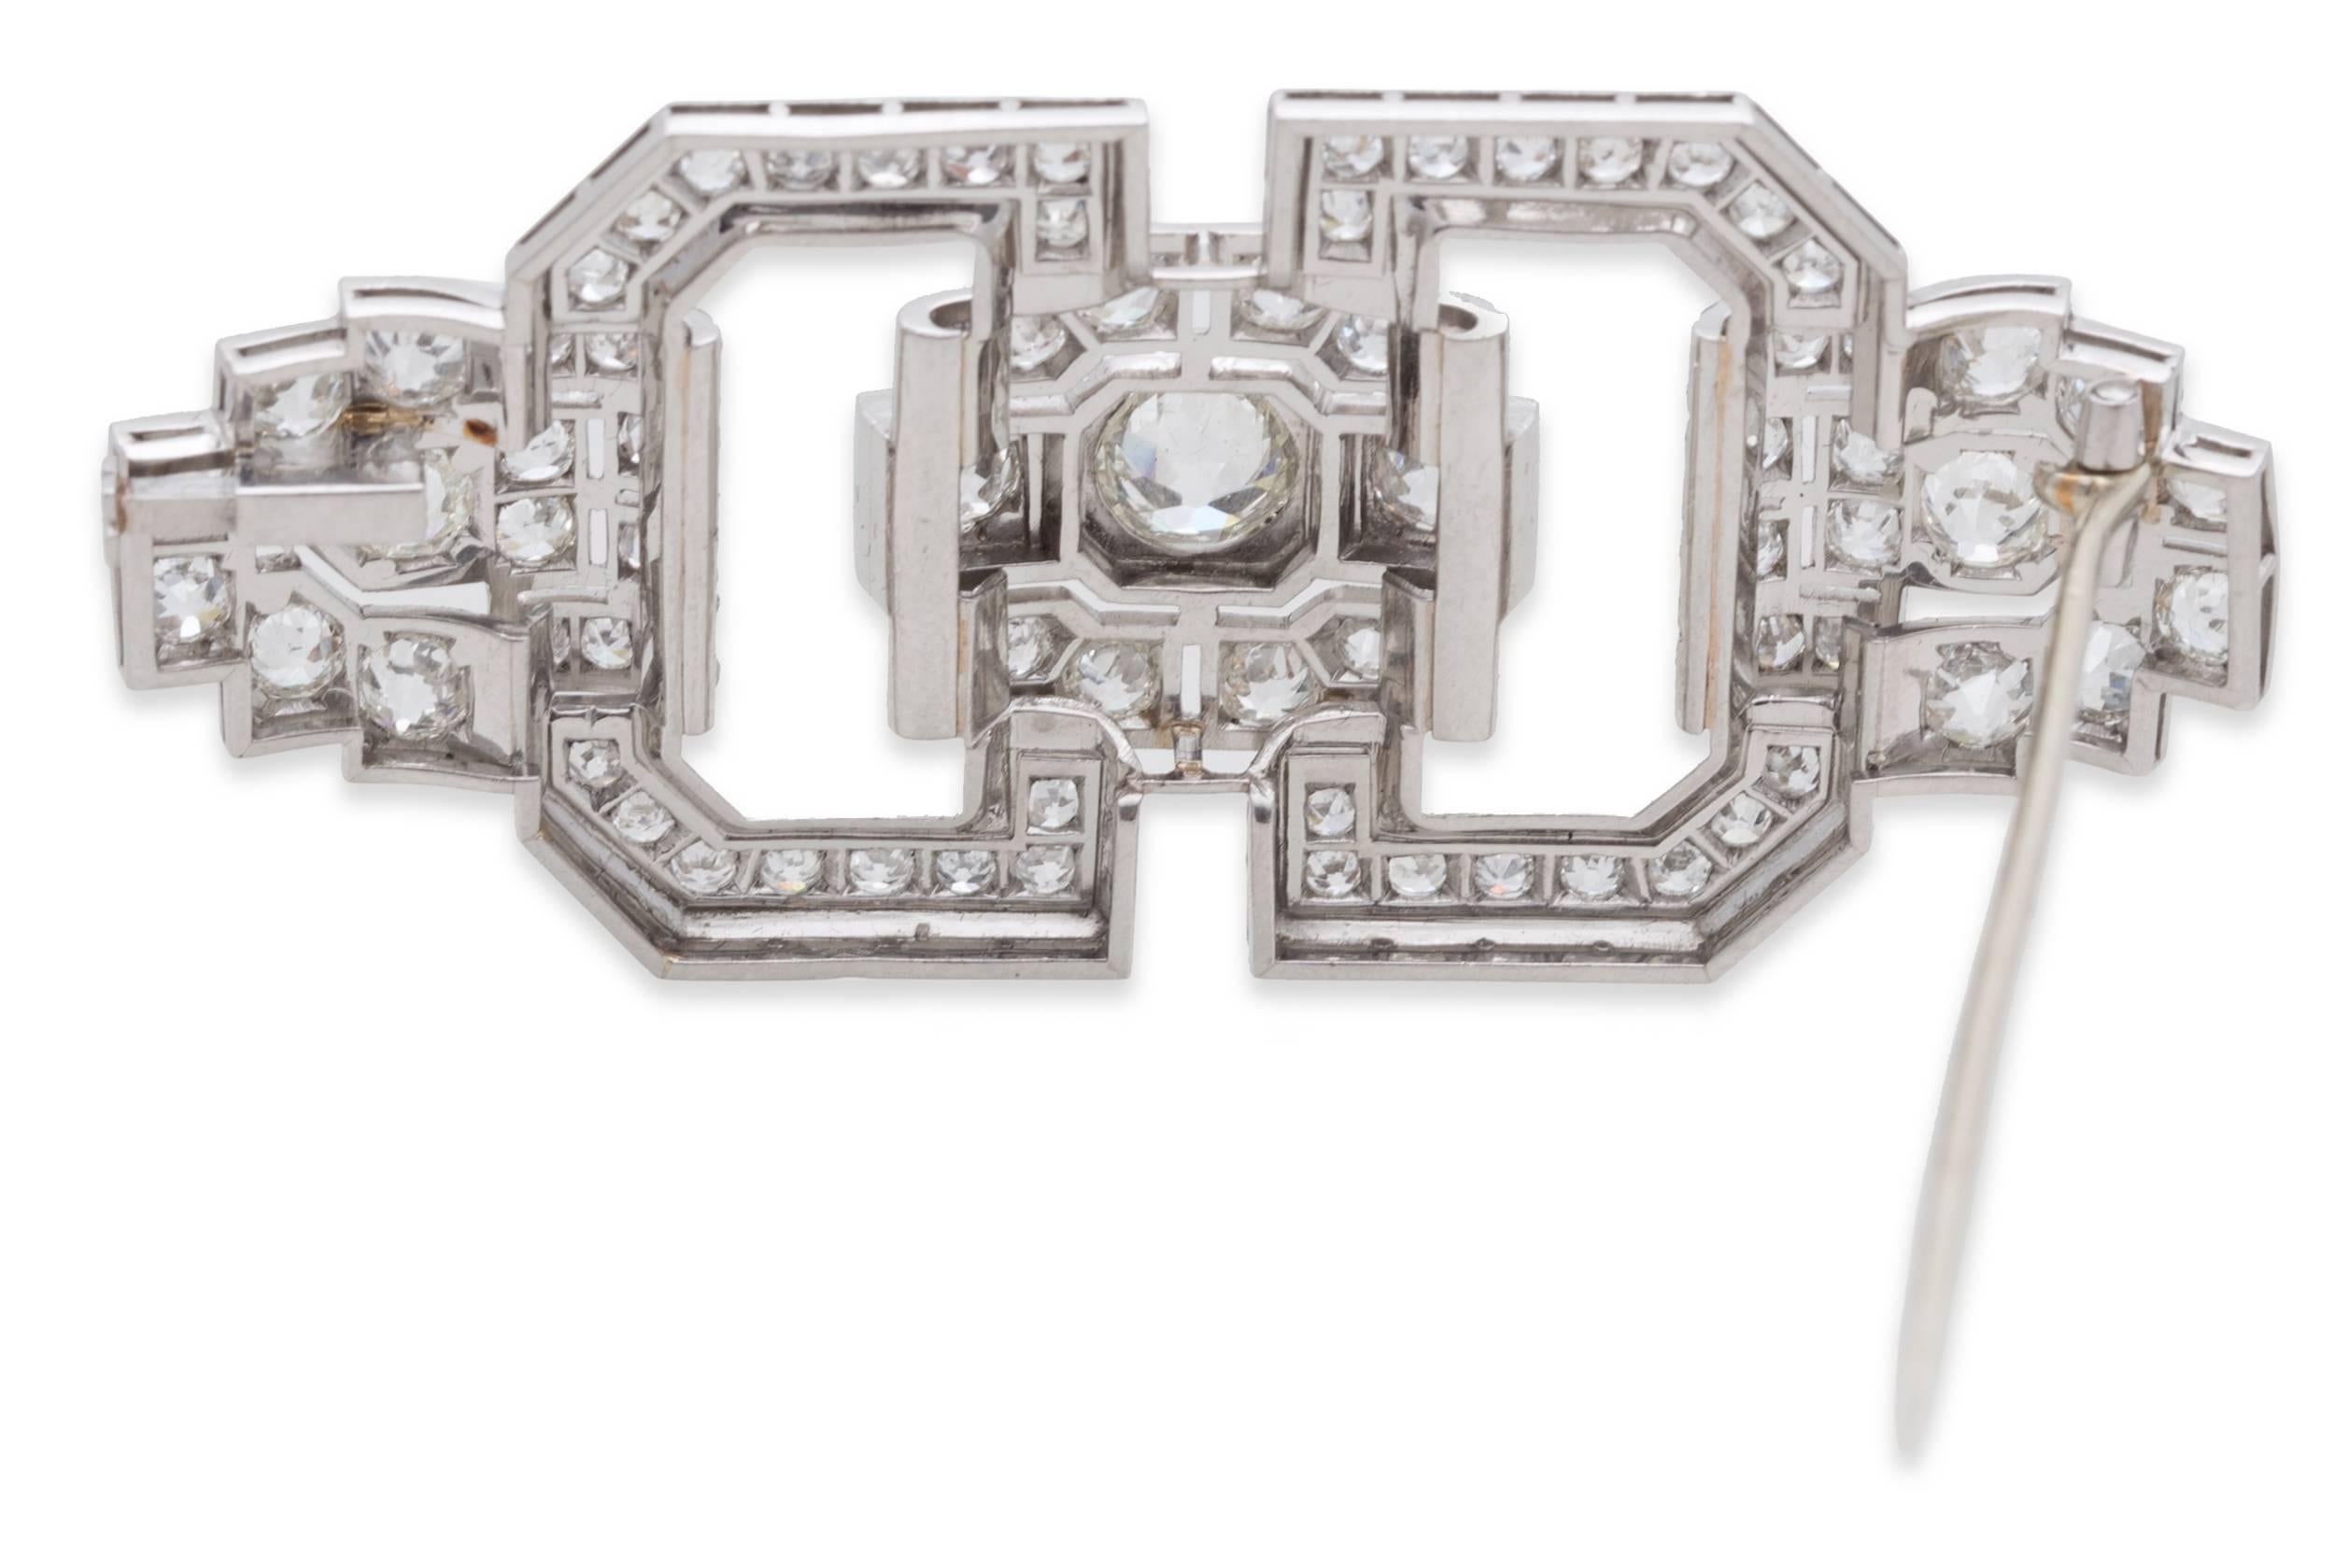 Diamond Art Deco Brooch in Platinum with Round Diamonds. Round Center Diamond: 1.00ct., Total Diamond Weight: 6.30ct, Brooch Dimensions: L 2.49